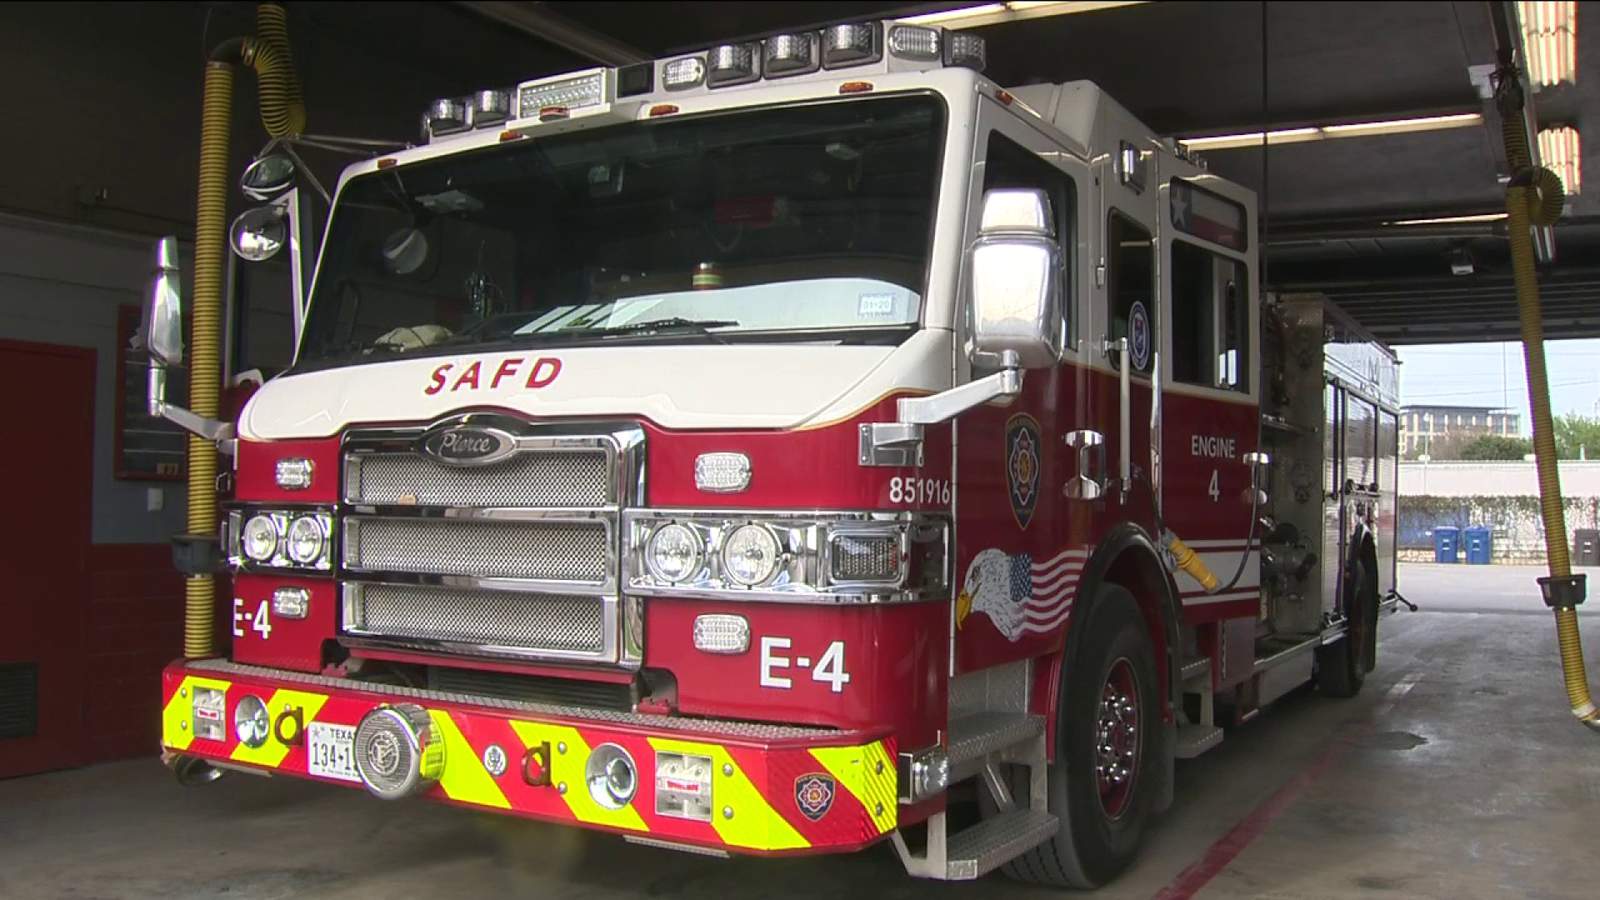 San Antonio Fire Station 14 to remain closed due to COVID-19 infections